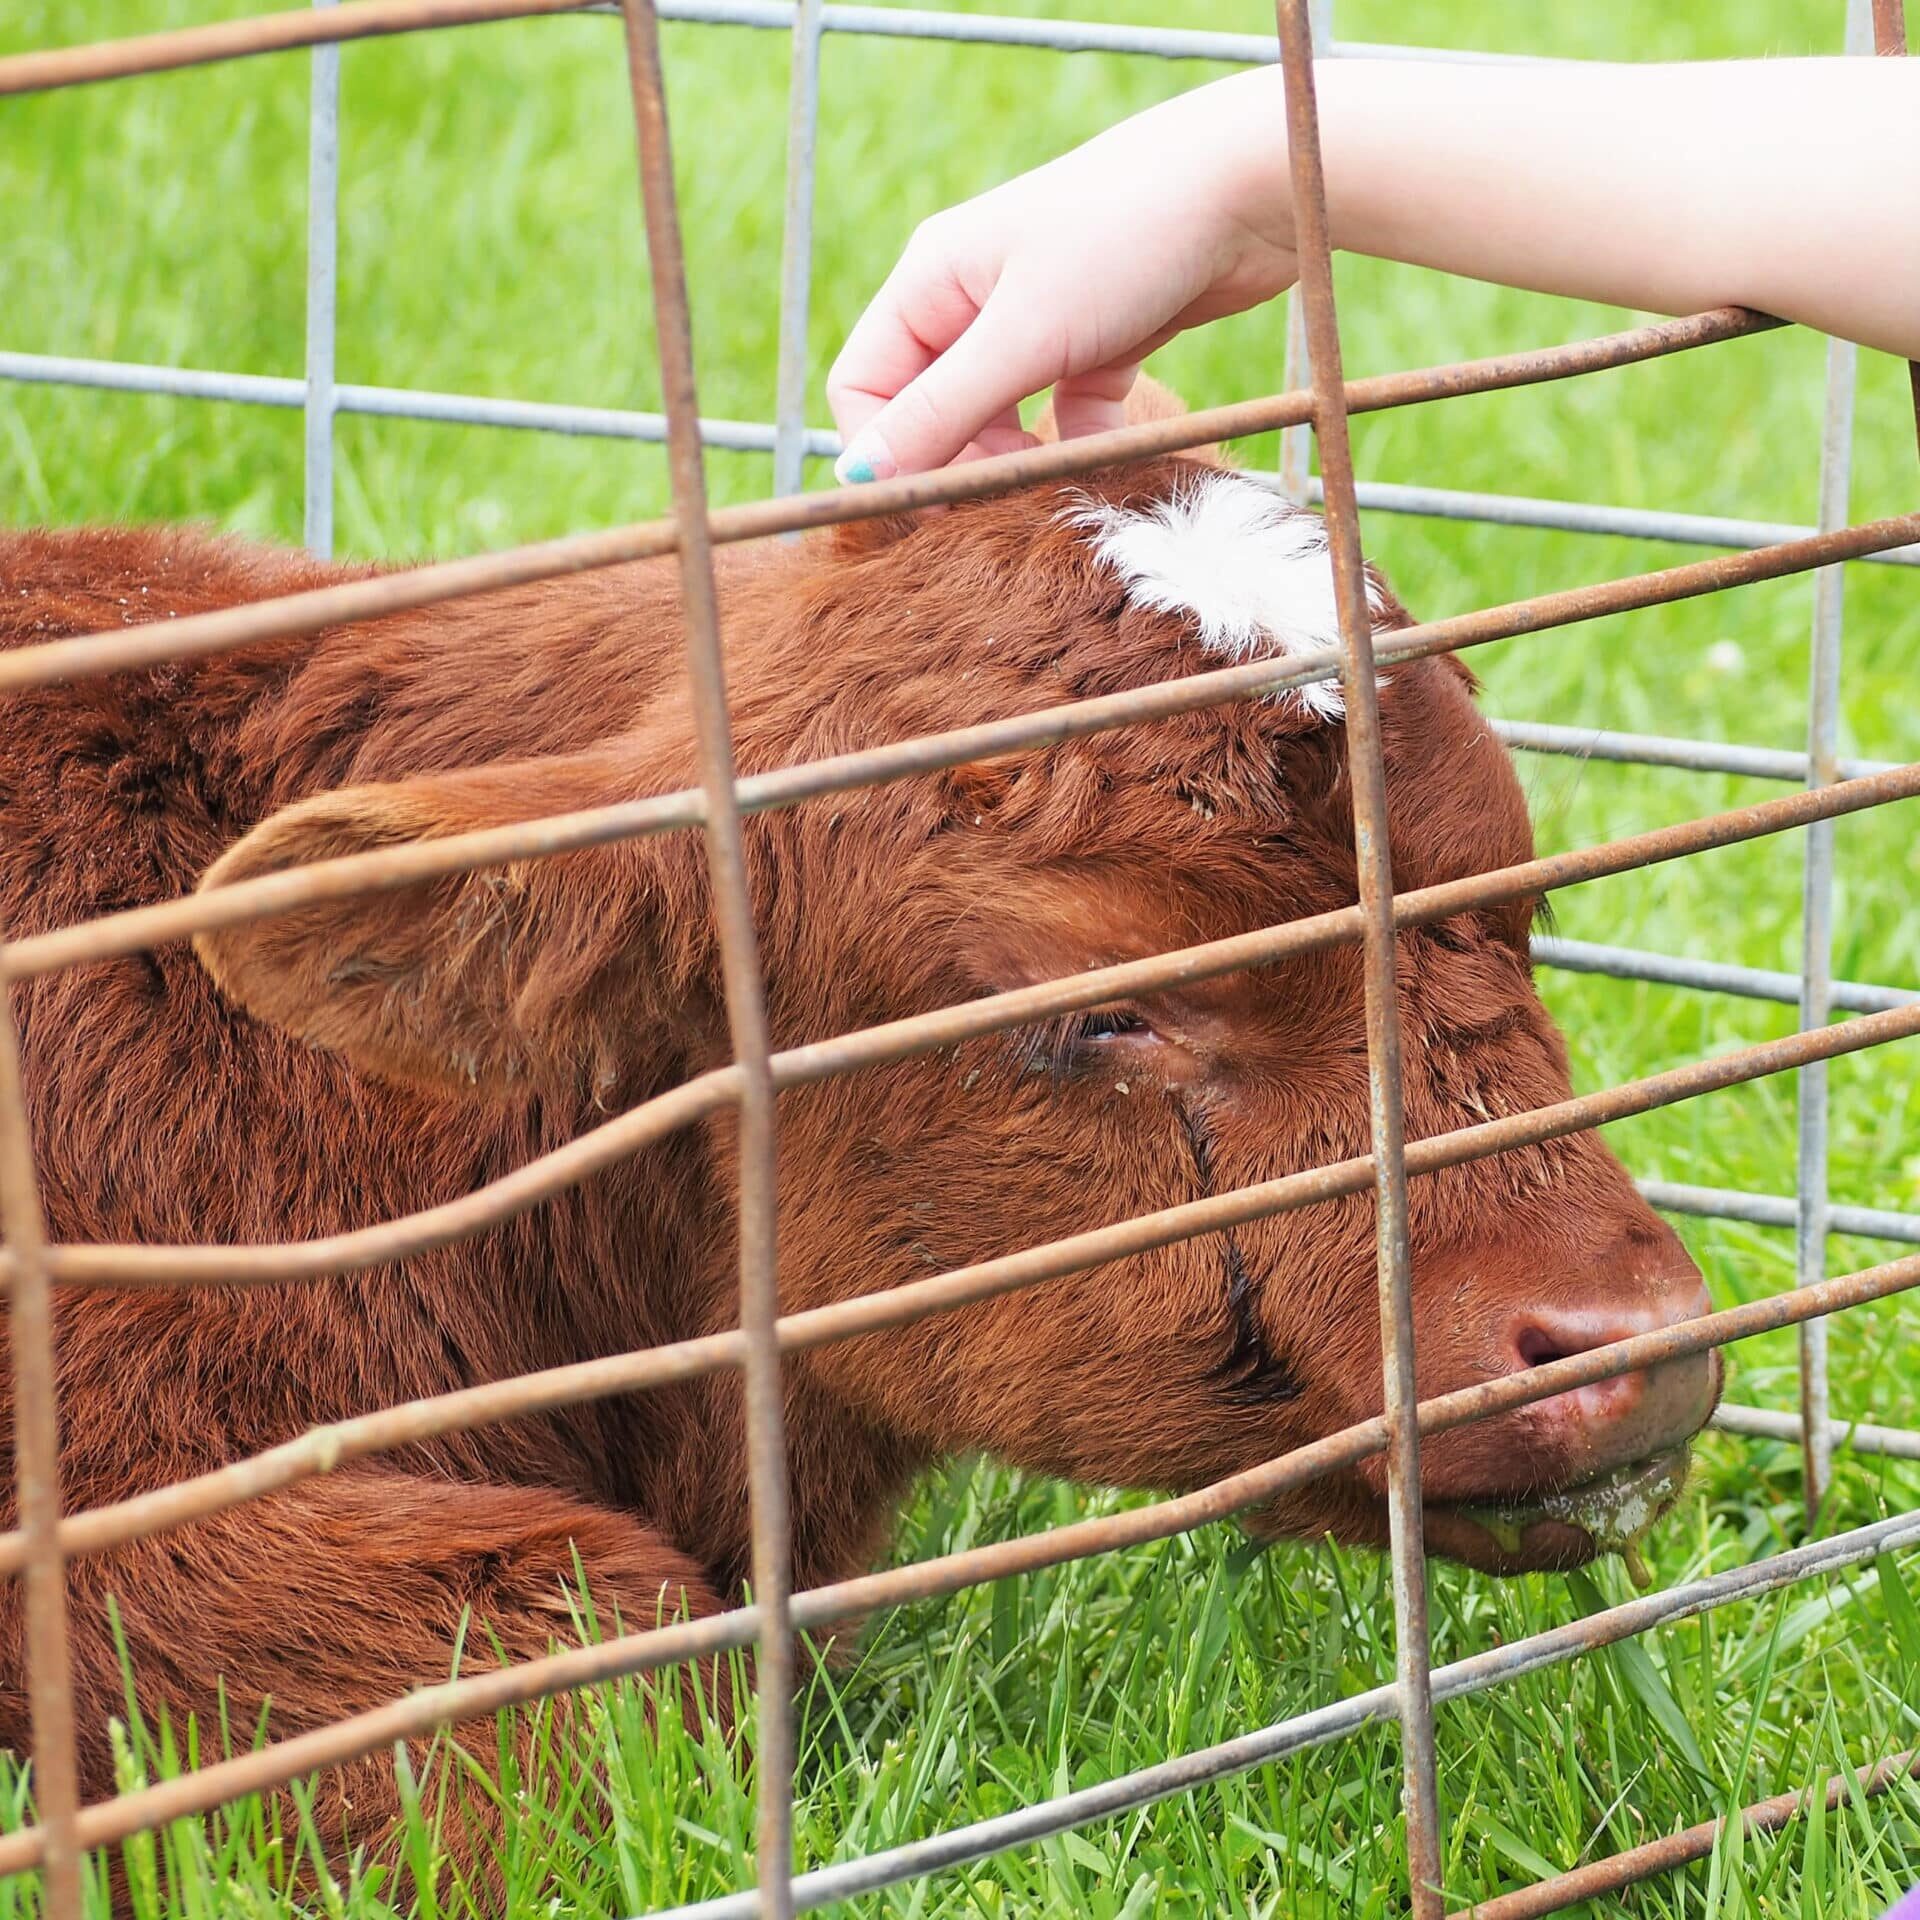 A person interacting with a calf in an enclosed space.